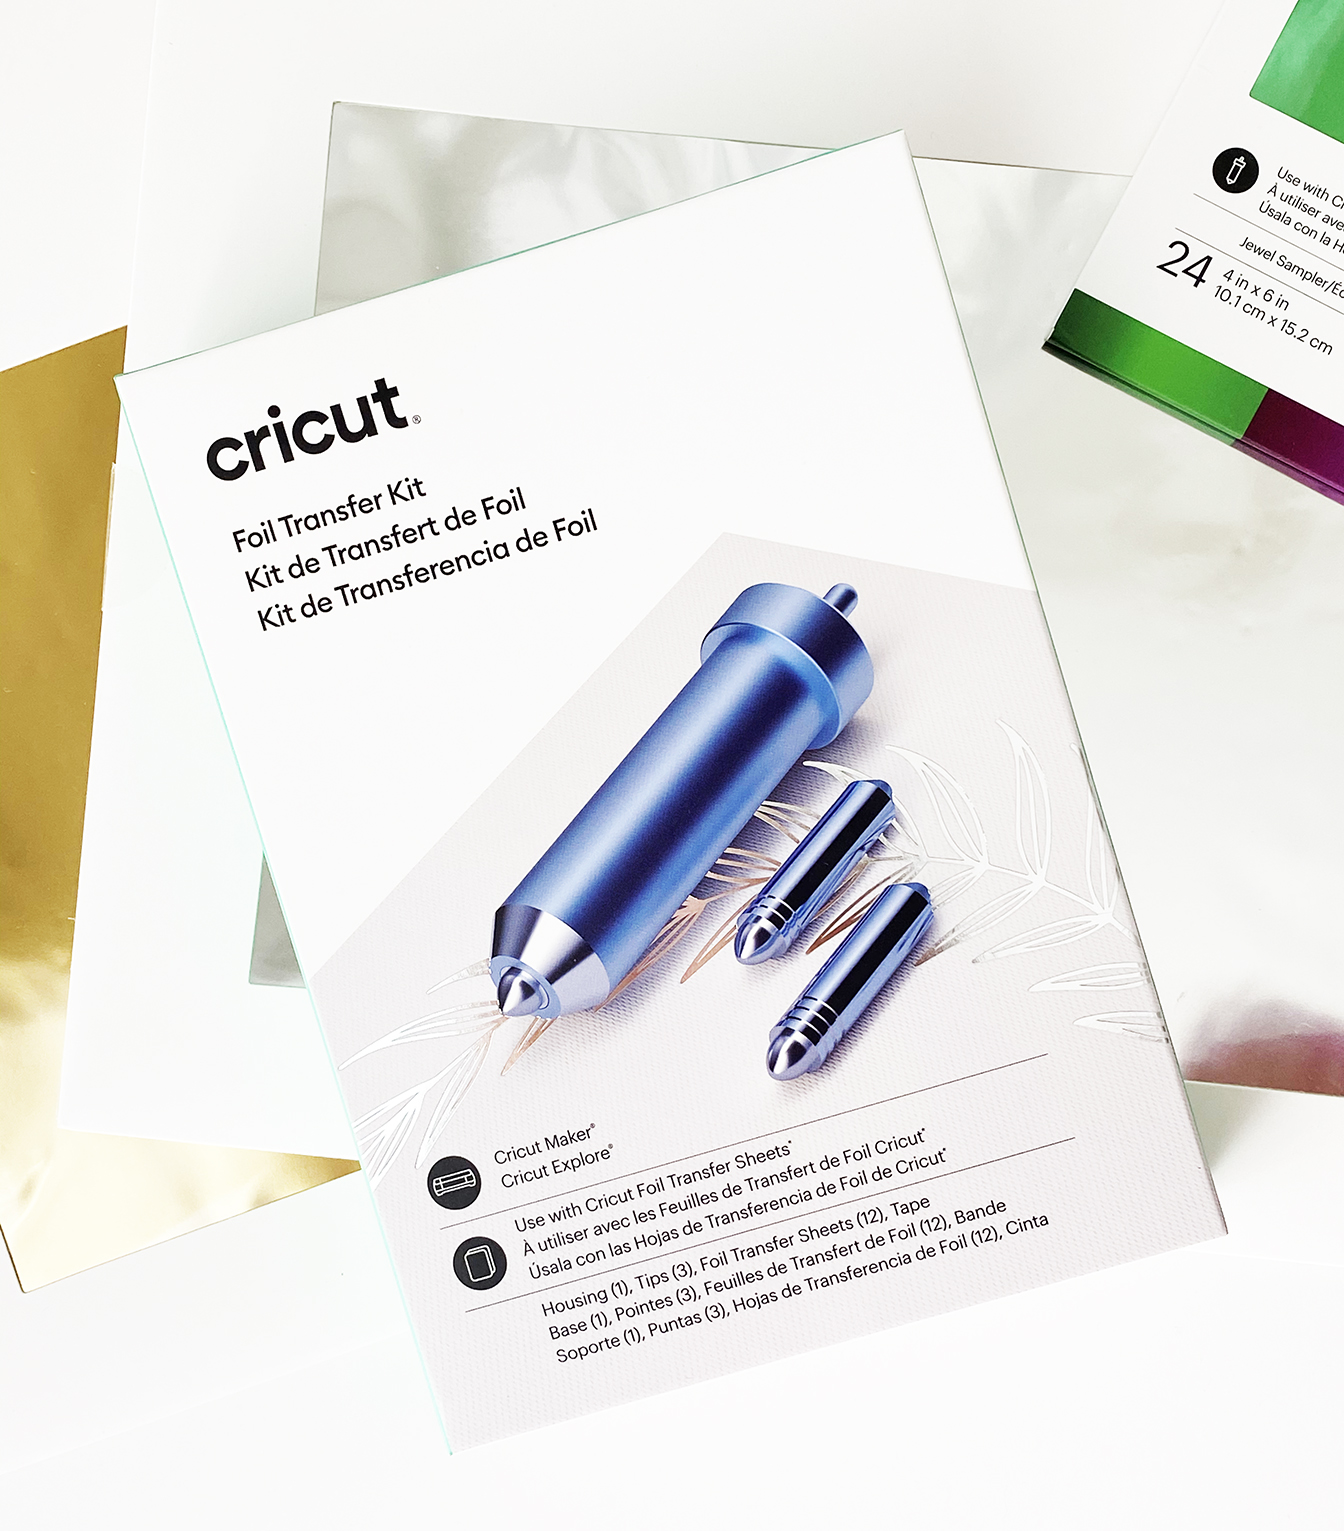 What is the Cricut Foil Transfer System?